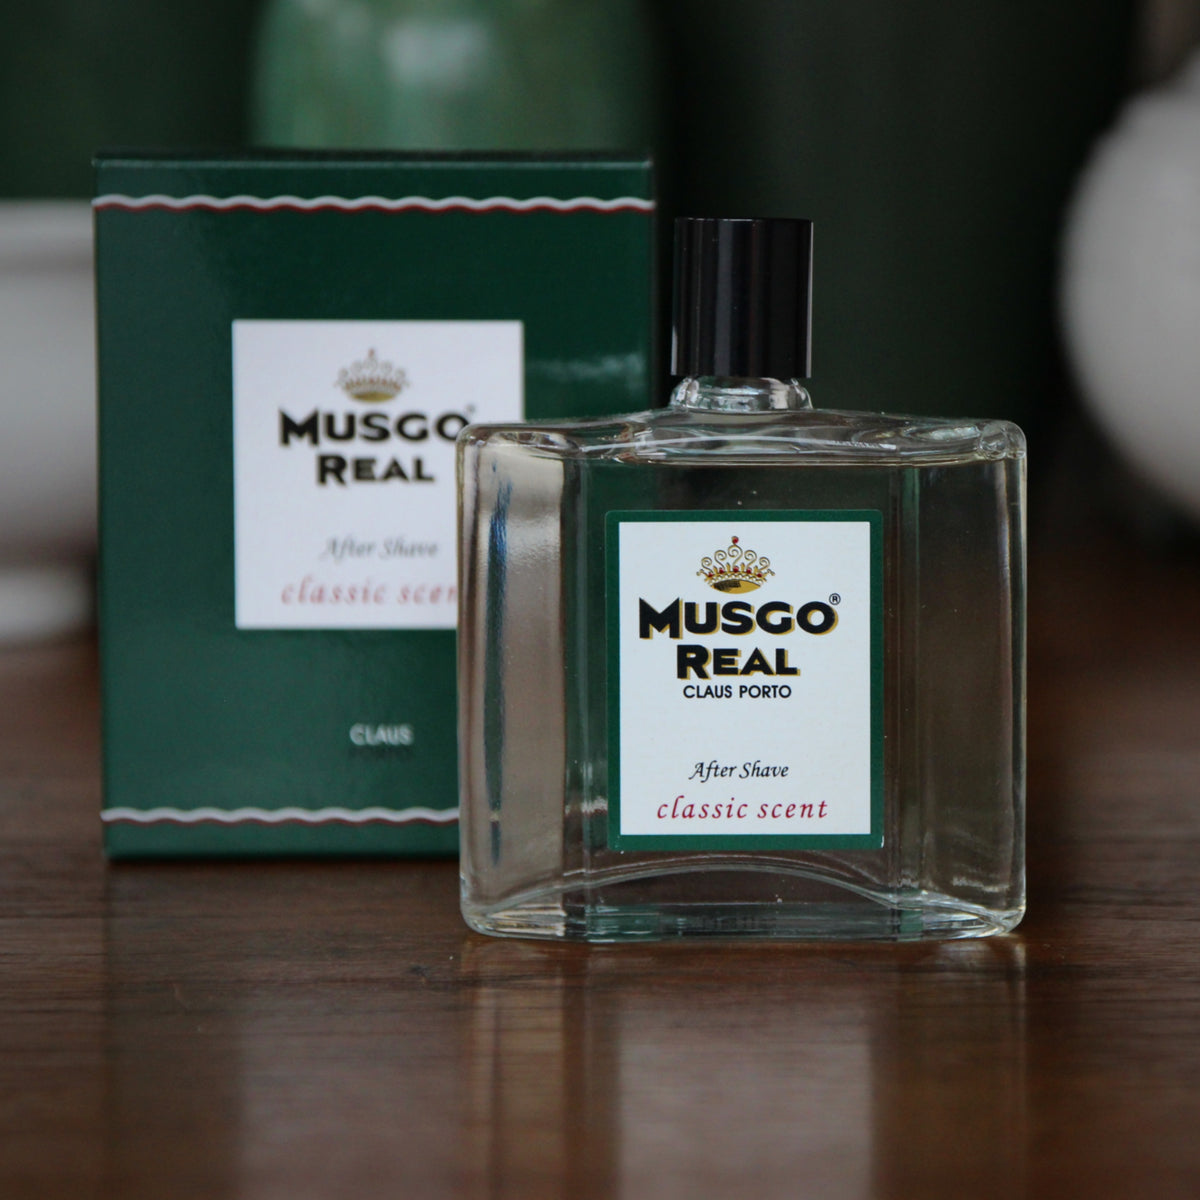 Musgo Real Classic Portuguese Aftershave by Claus Porto – LEO Design, Ltd.